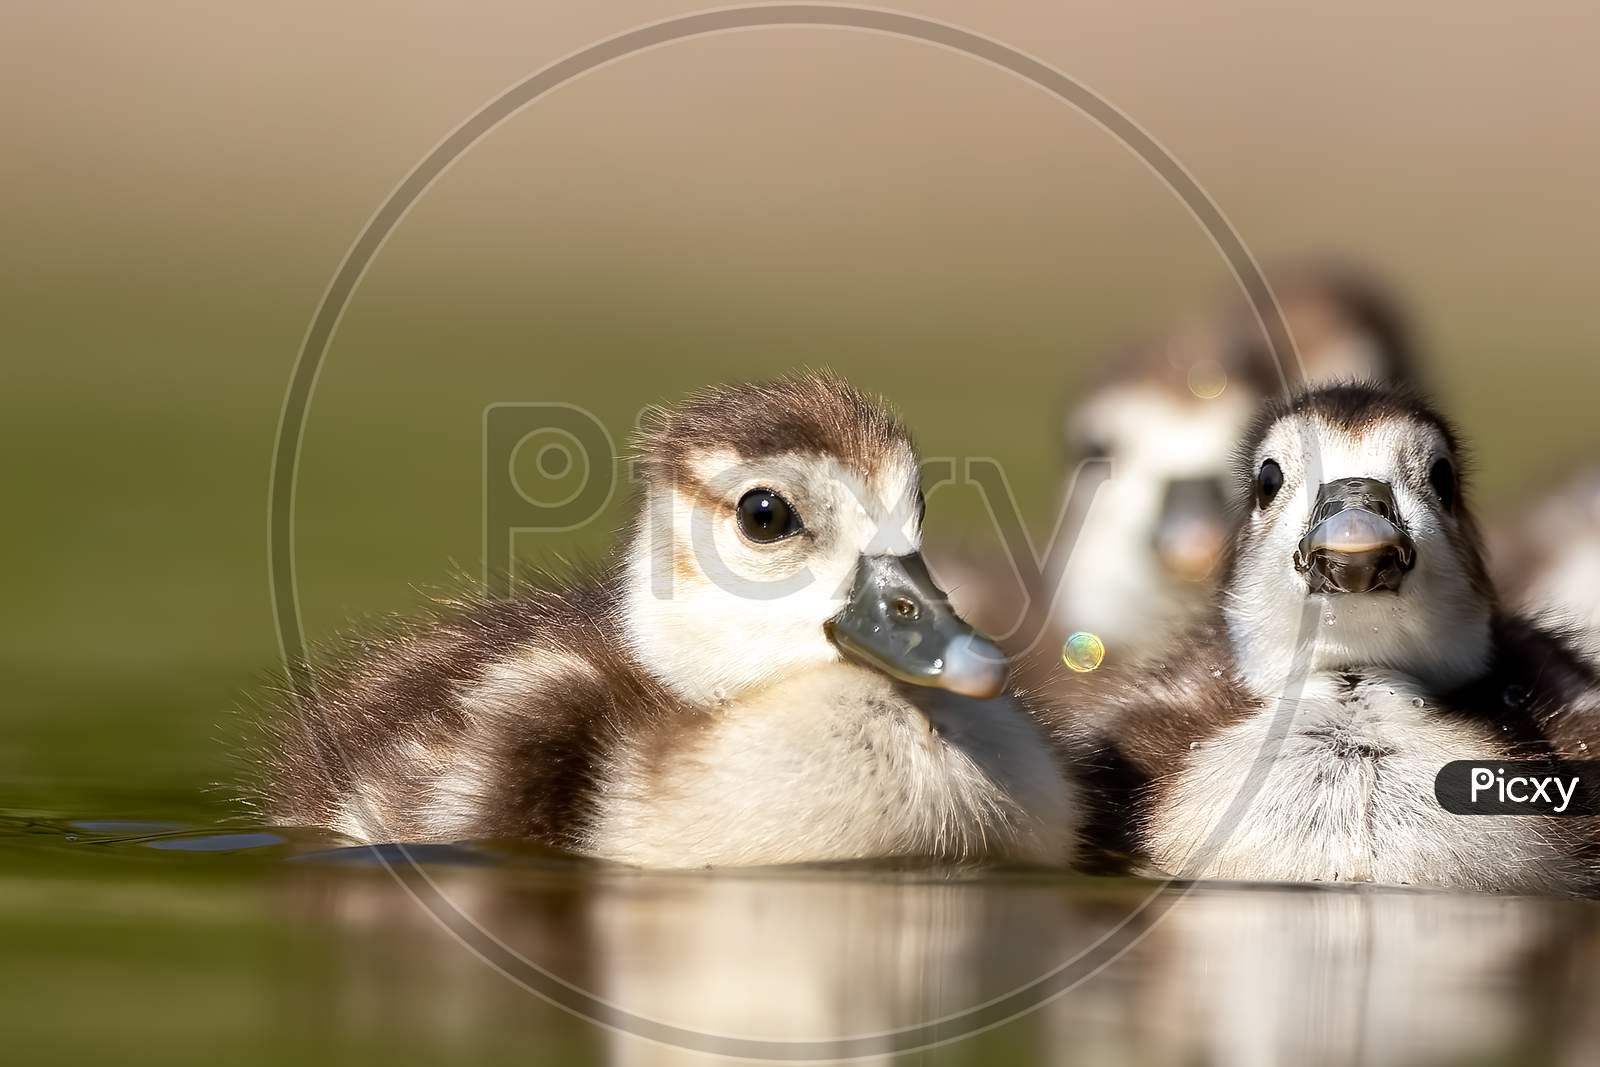 An Egyptian goose family swimming in a little pond in Cologne, Germany at a sunny day in summer.